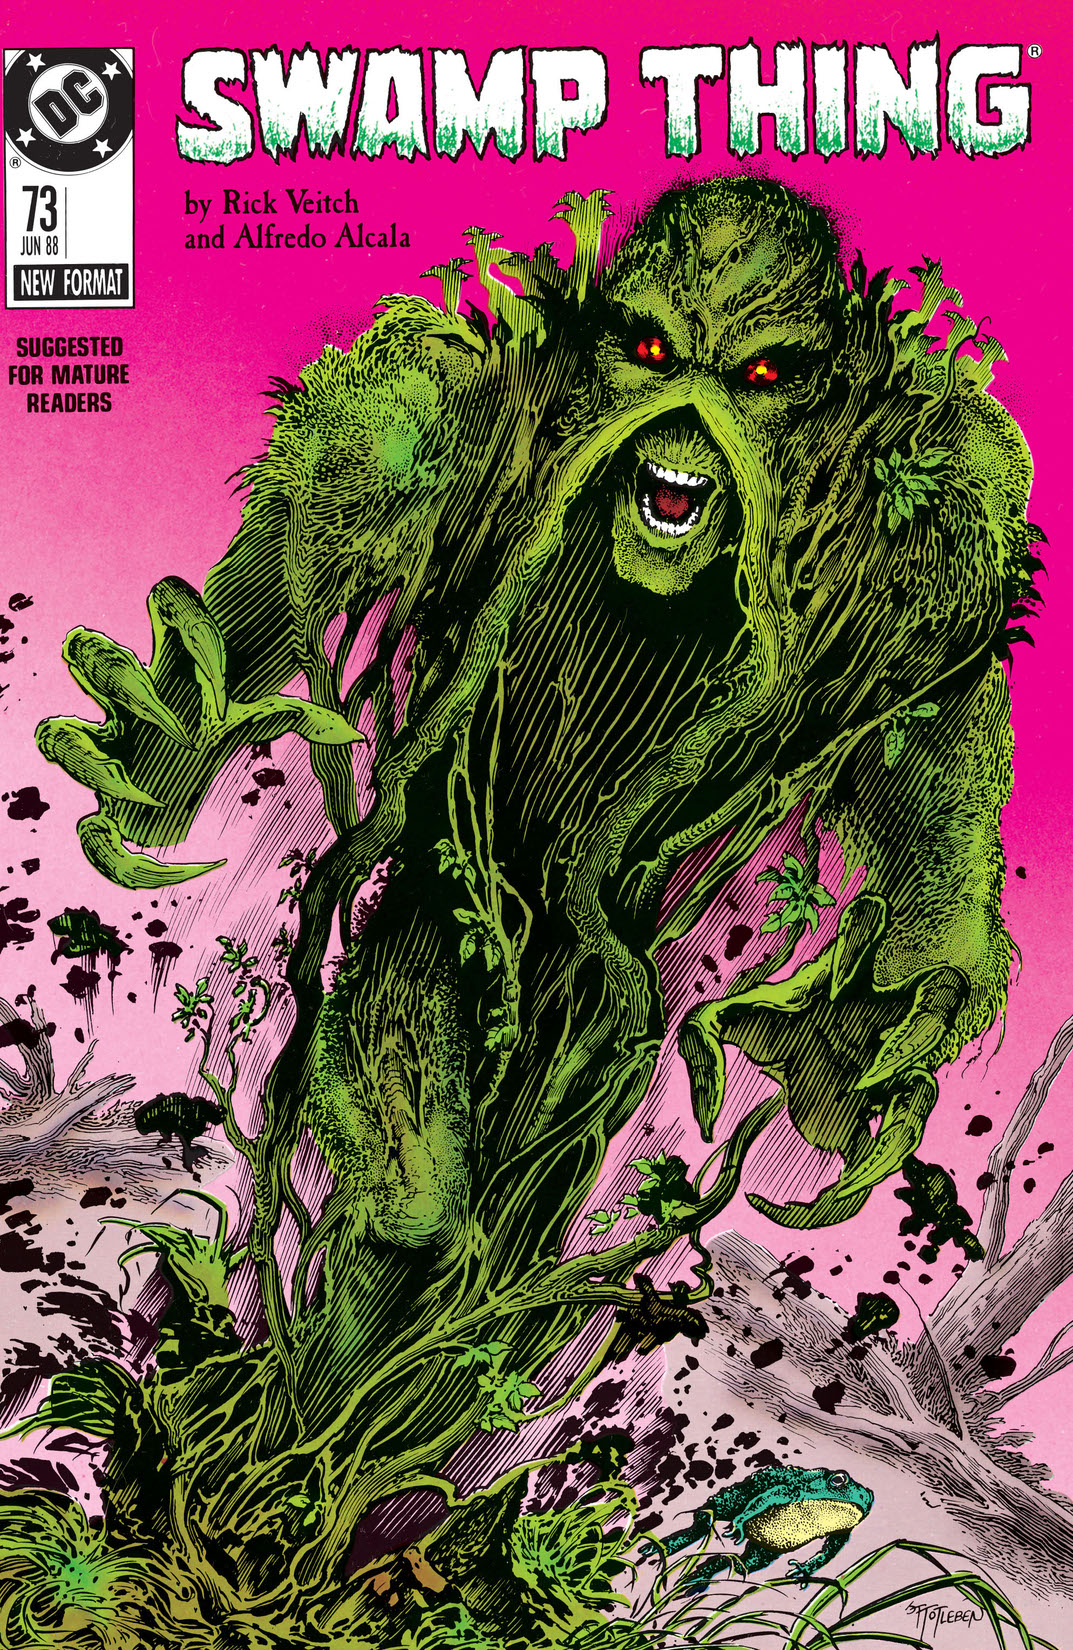 Swamp Thing (1985-1996) #73 preview images